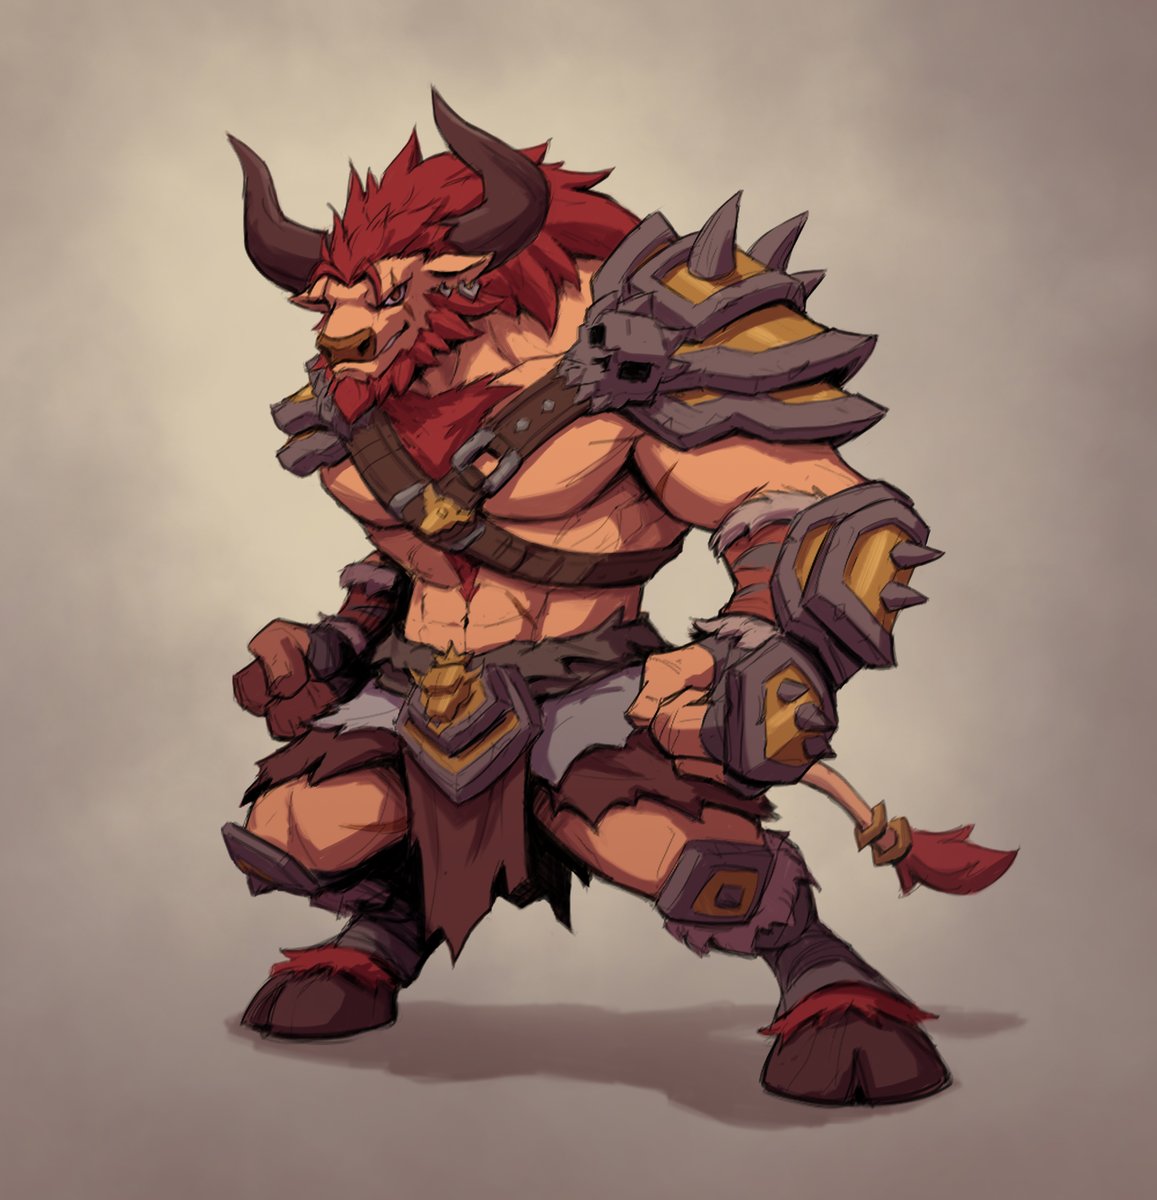 Commission I did recently. It was very fun to draw this character! Hope you like it! #digitalart #conceptart #characterdesign #fantasyart #wow #warcraft #warcraftart #tauren #characterart #commission #commissionsopen